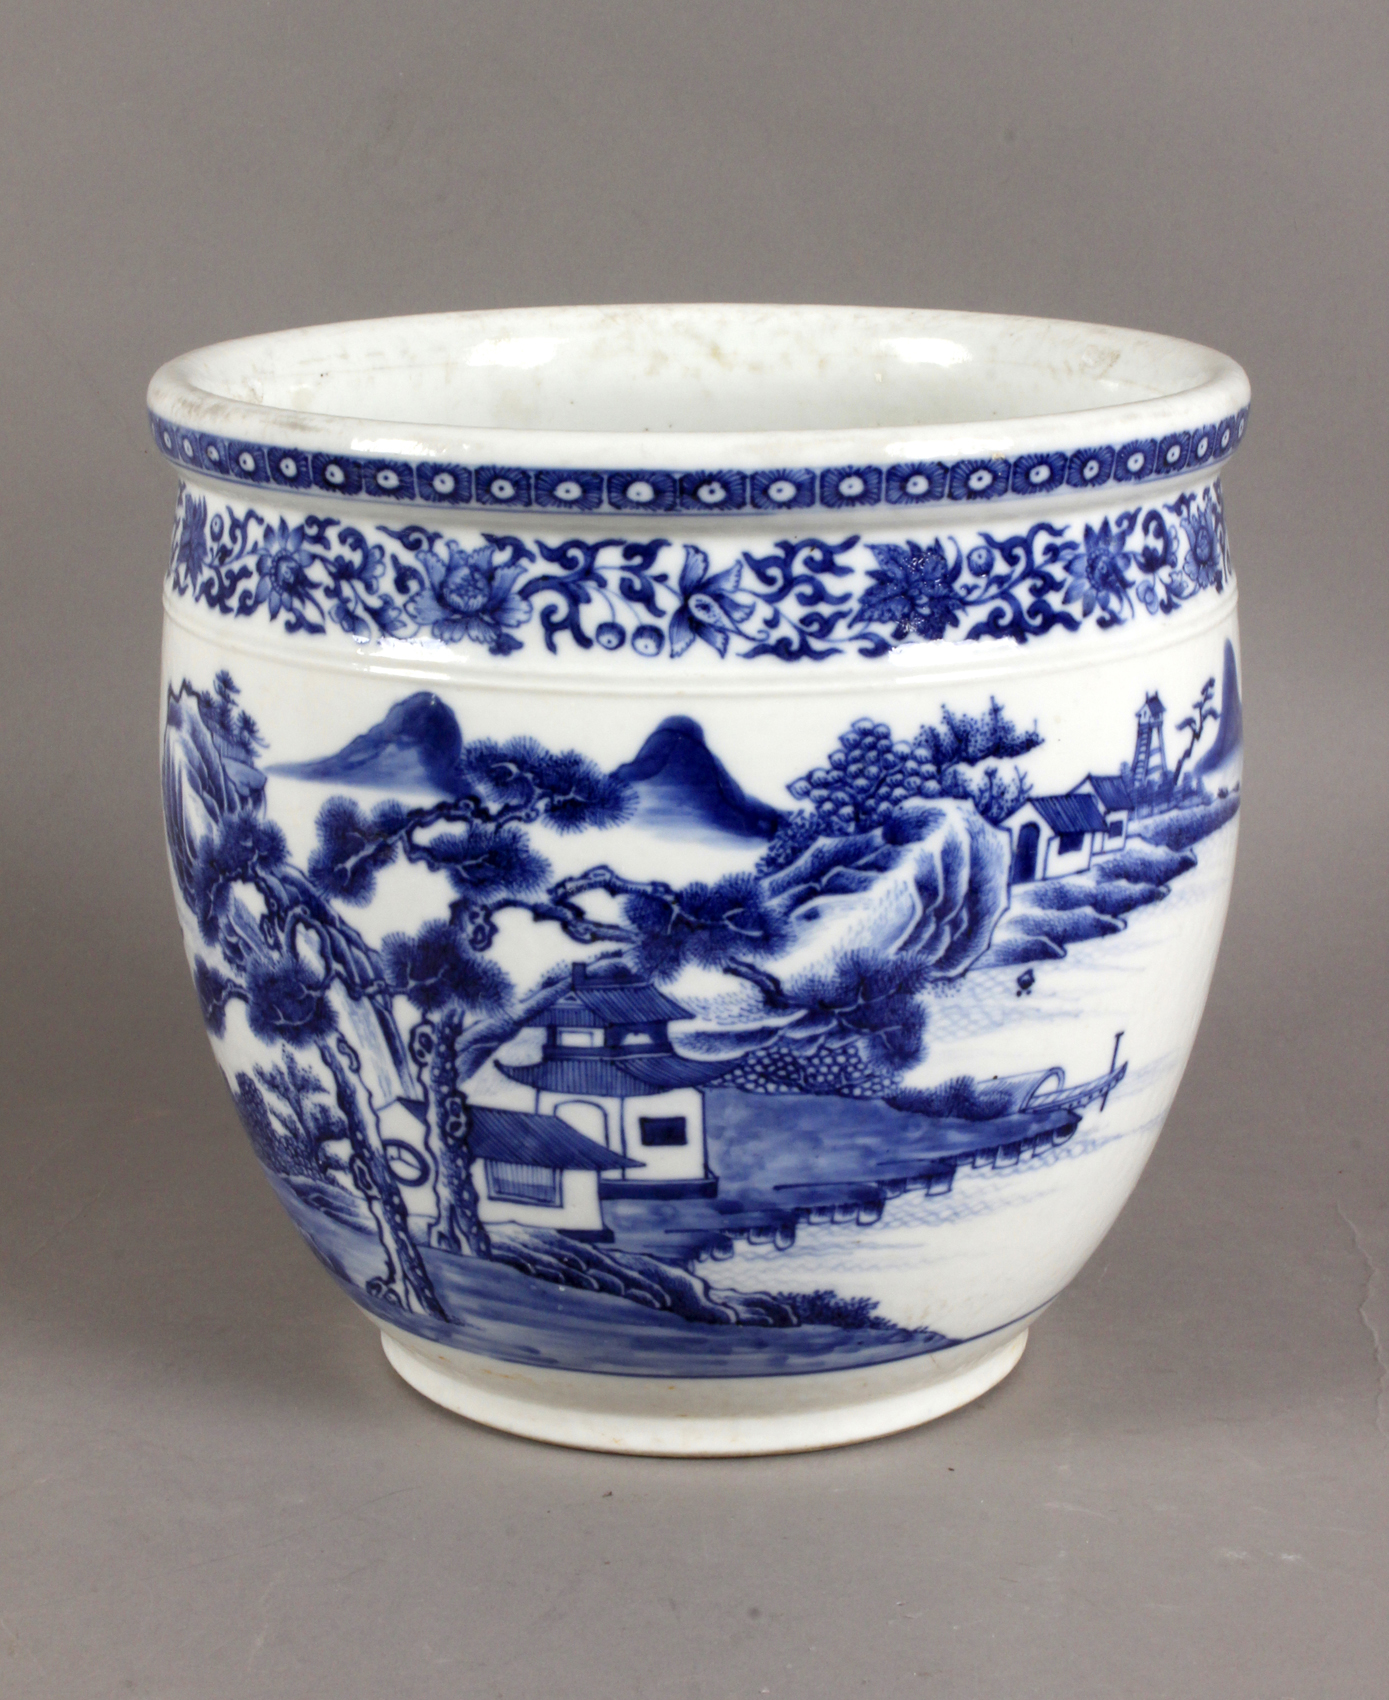 A late 18th century Chinese prob. Kangxi cache-pot in white and blue porcelain